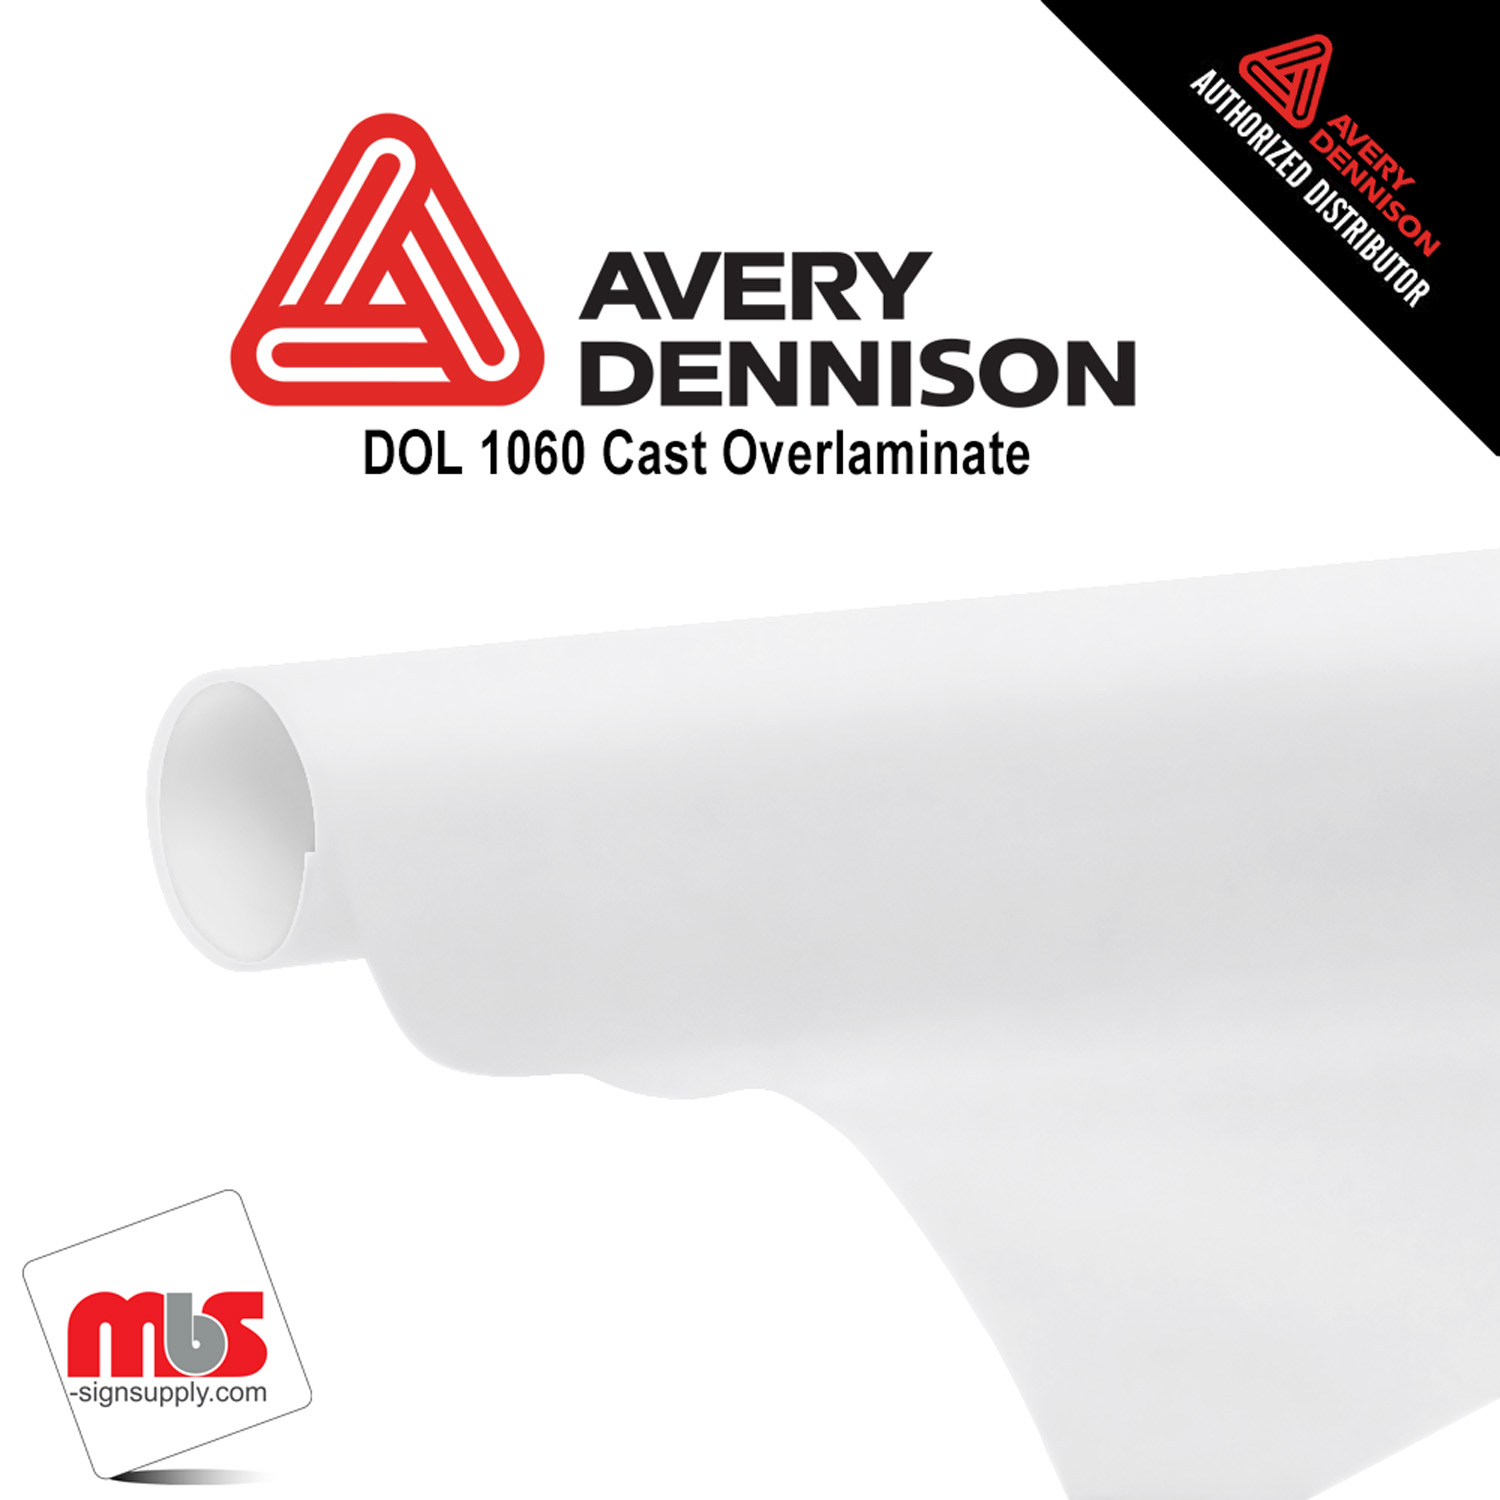 54'' x 25 yards Avery DOL1060Z High Gloss Clear 5 year Long Term Unpunched 2.1 Mil Cast Overlaminate (Color Code 103)